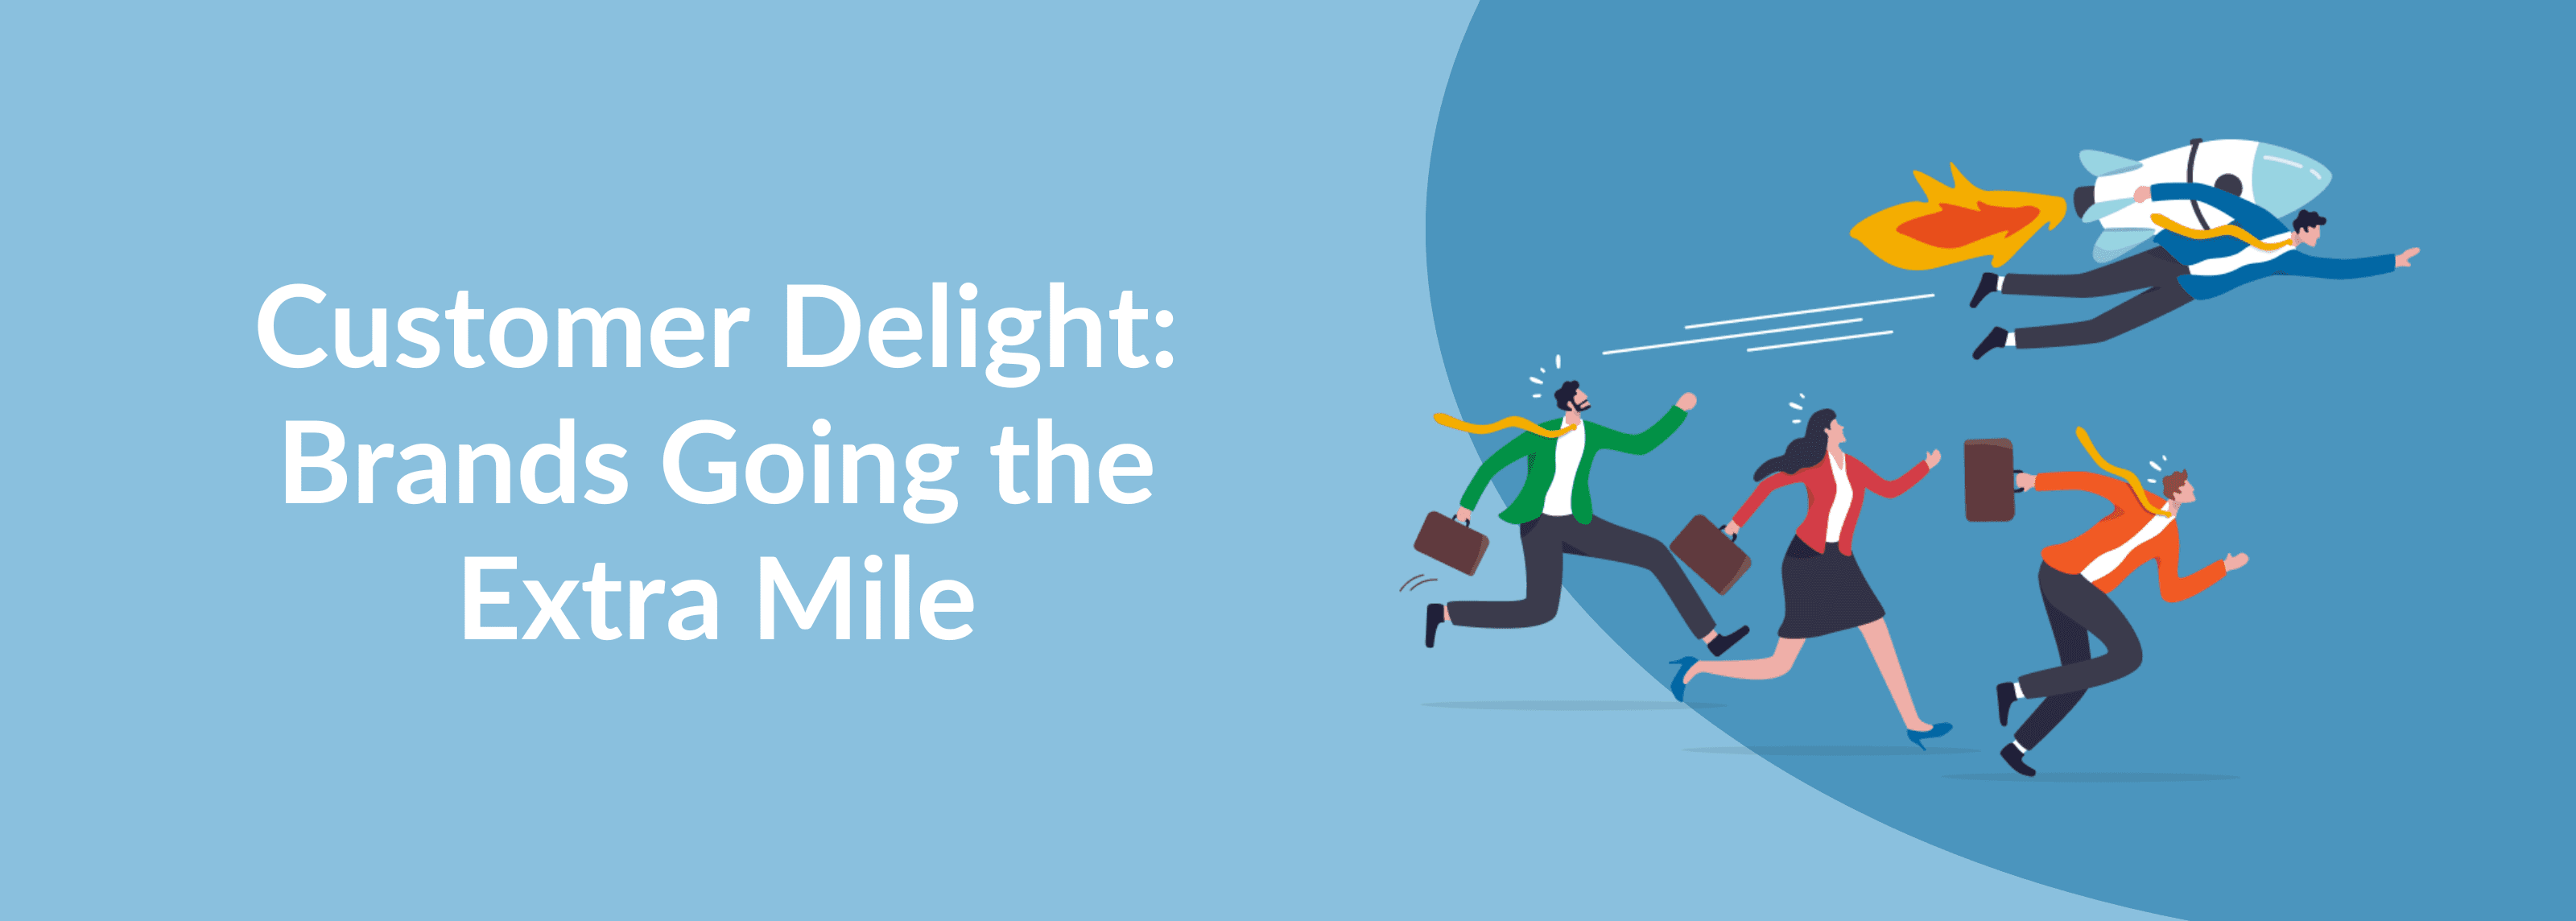 Customer Delight - Brands Going the Extra Mile